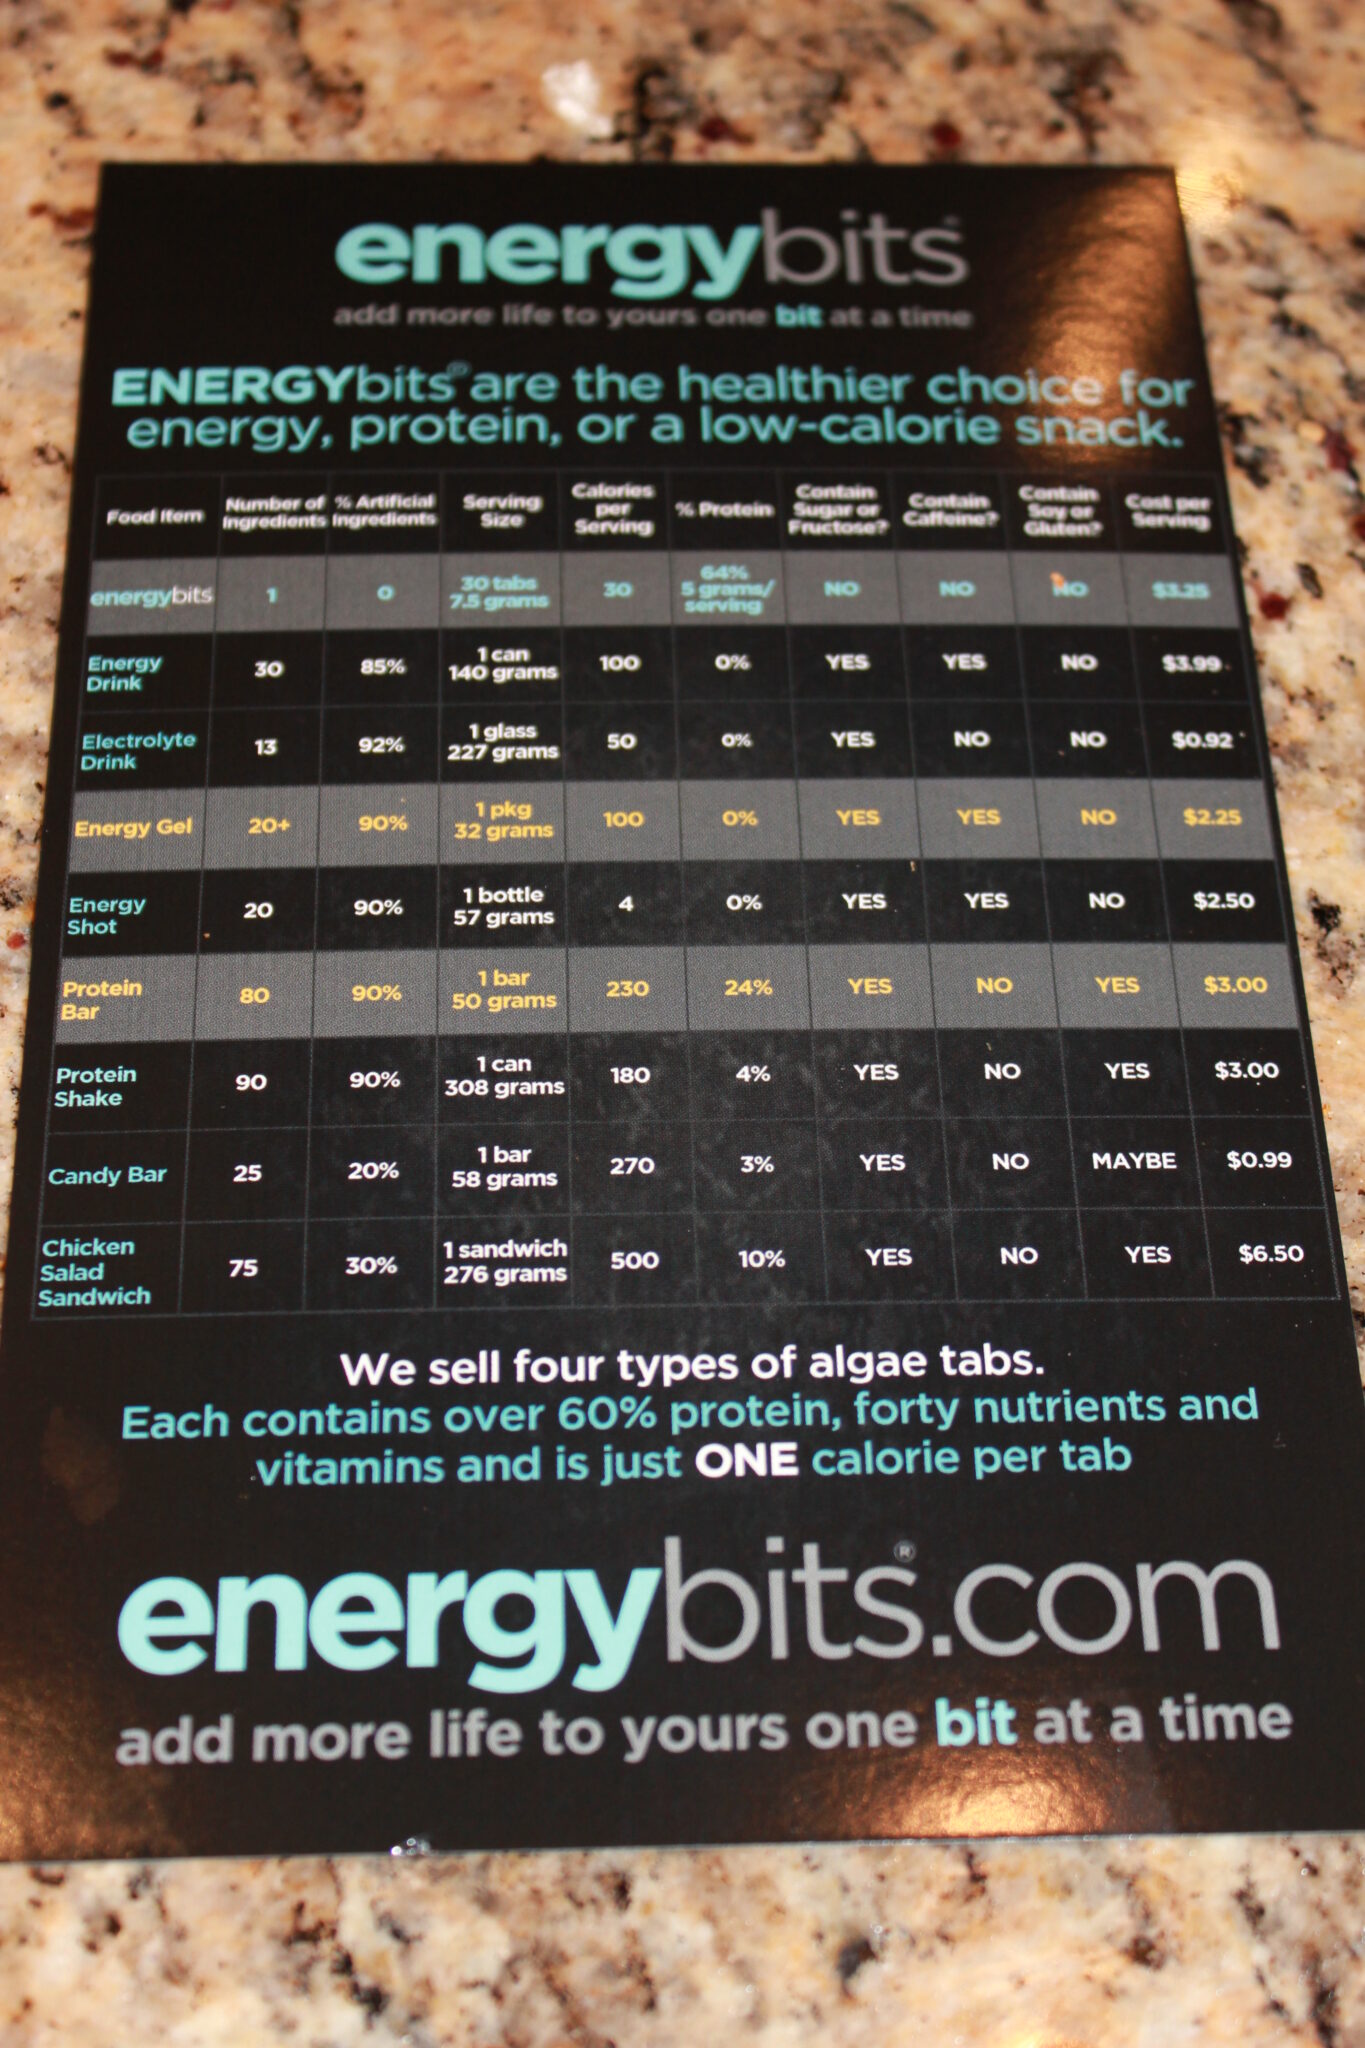 EnergyBits Review and Giveaway! The Lyons' Share Wellness